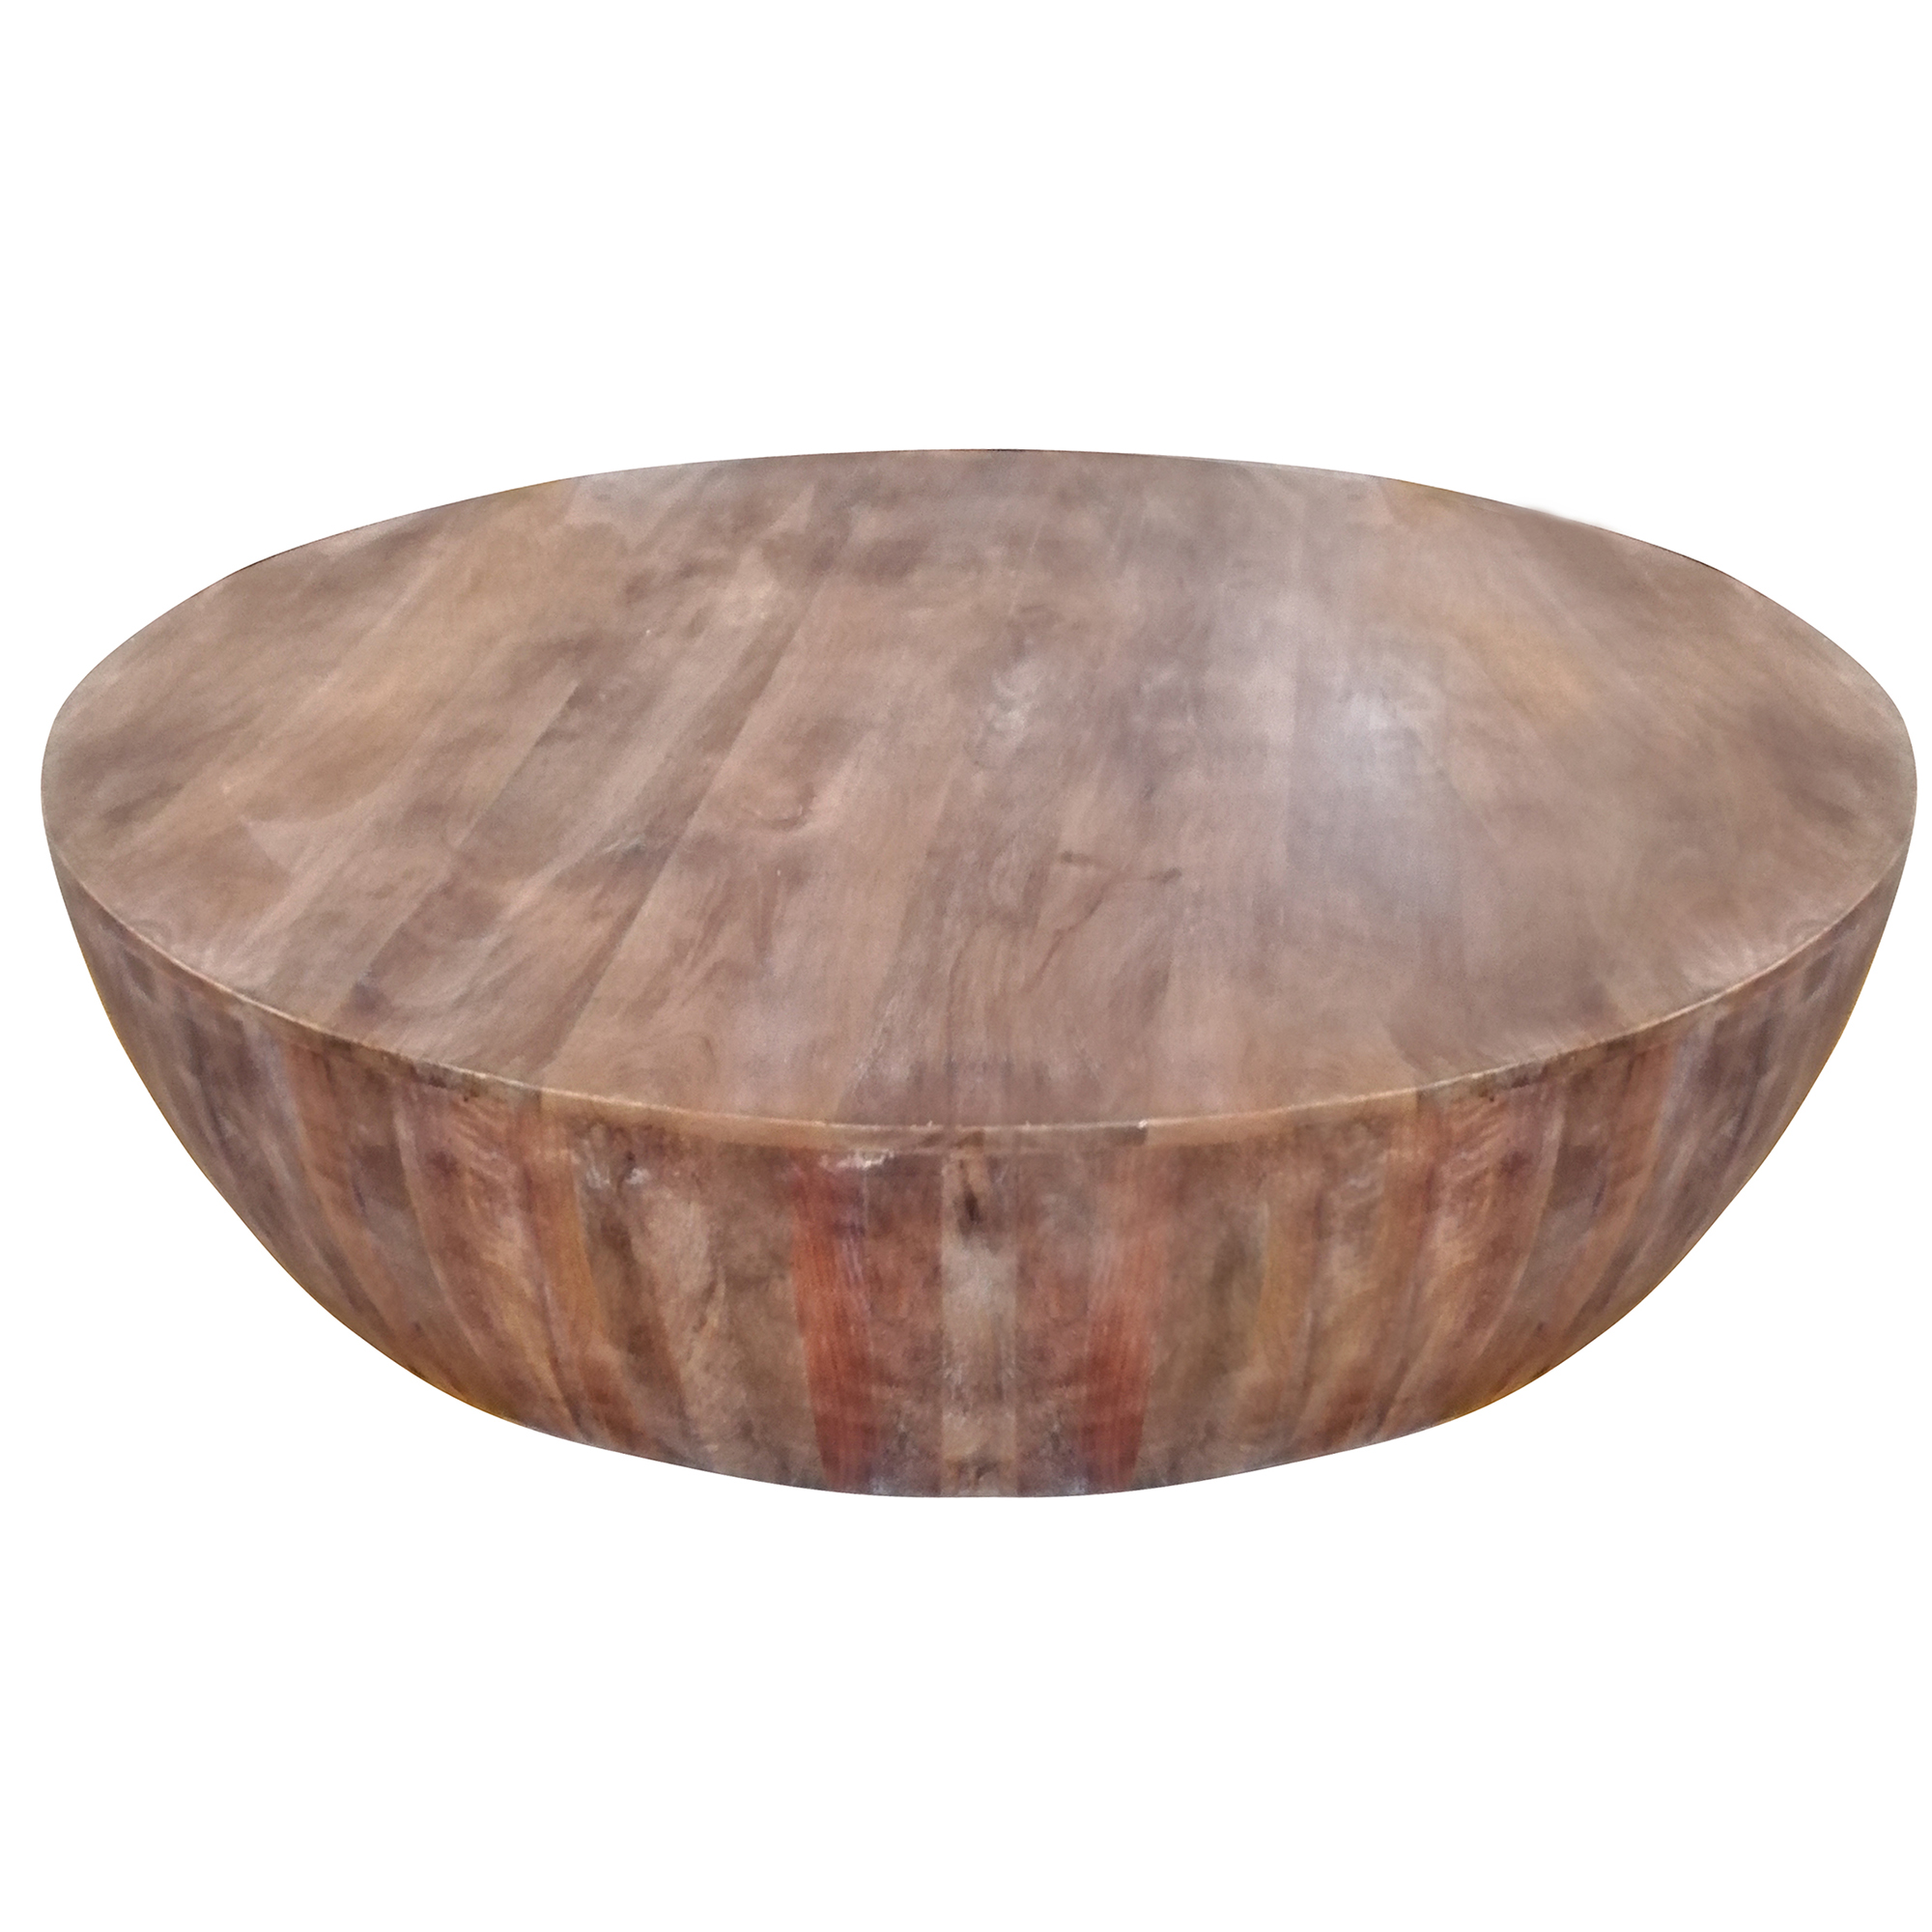 The Urban Port Handcarved Drum Shape Round Top Mango Wood Distressed Wooden coffee Table, Brown